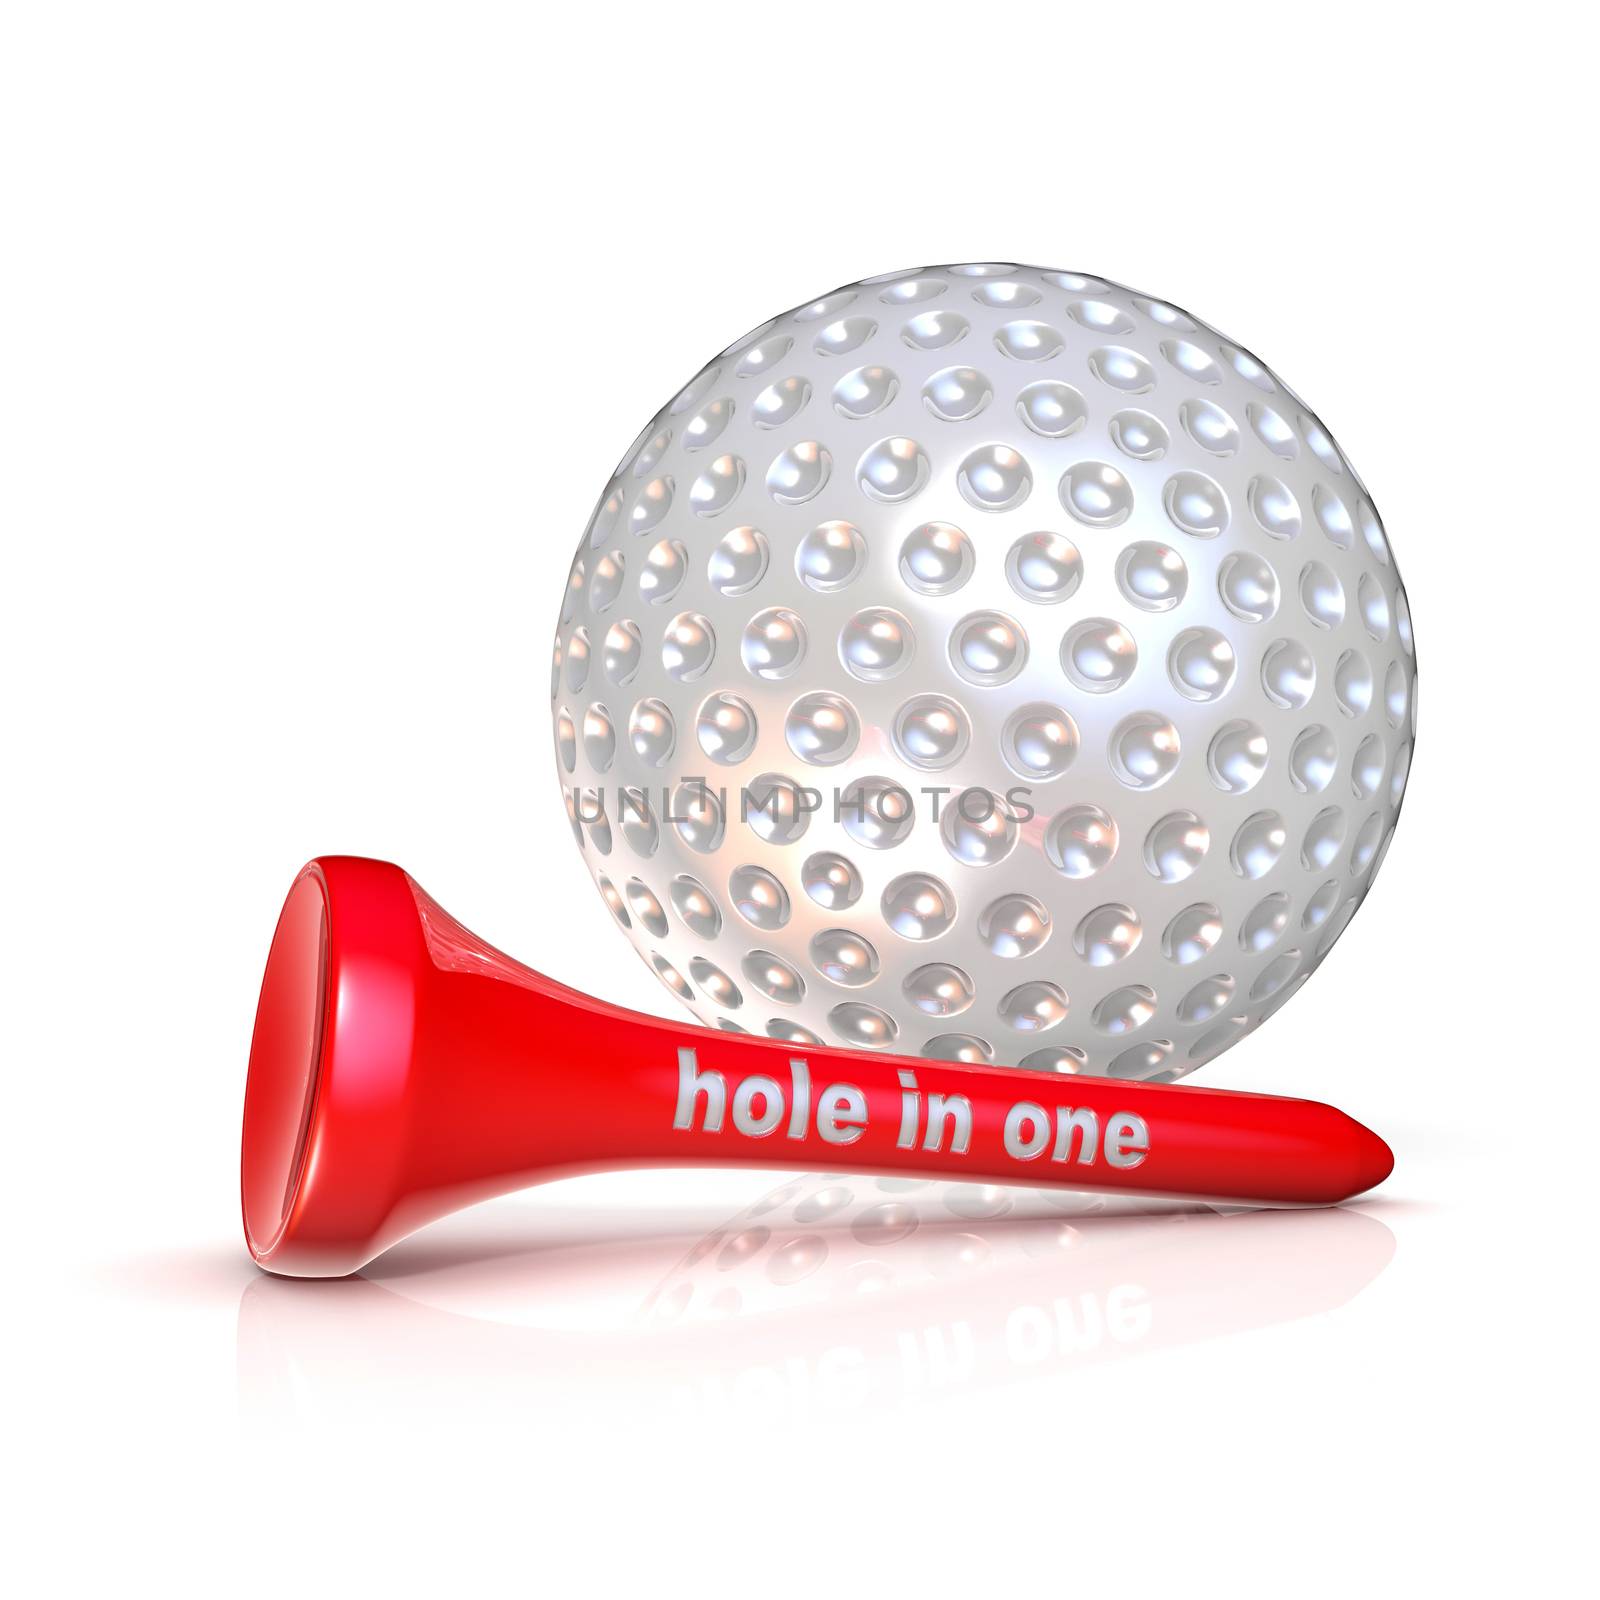 Golf ball and tee. Hole in one sign. Isolated over white background. 3D render illustration